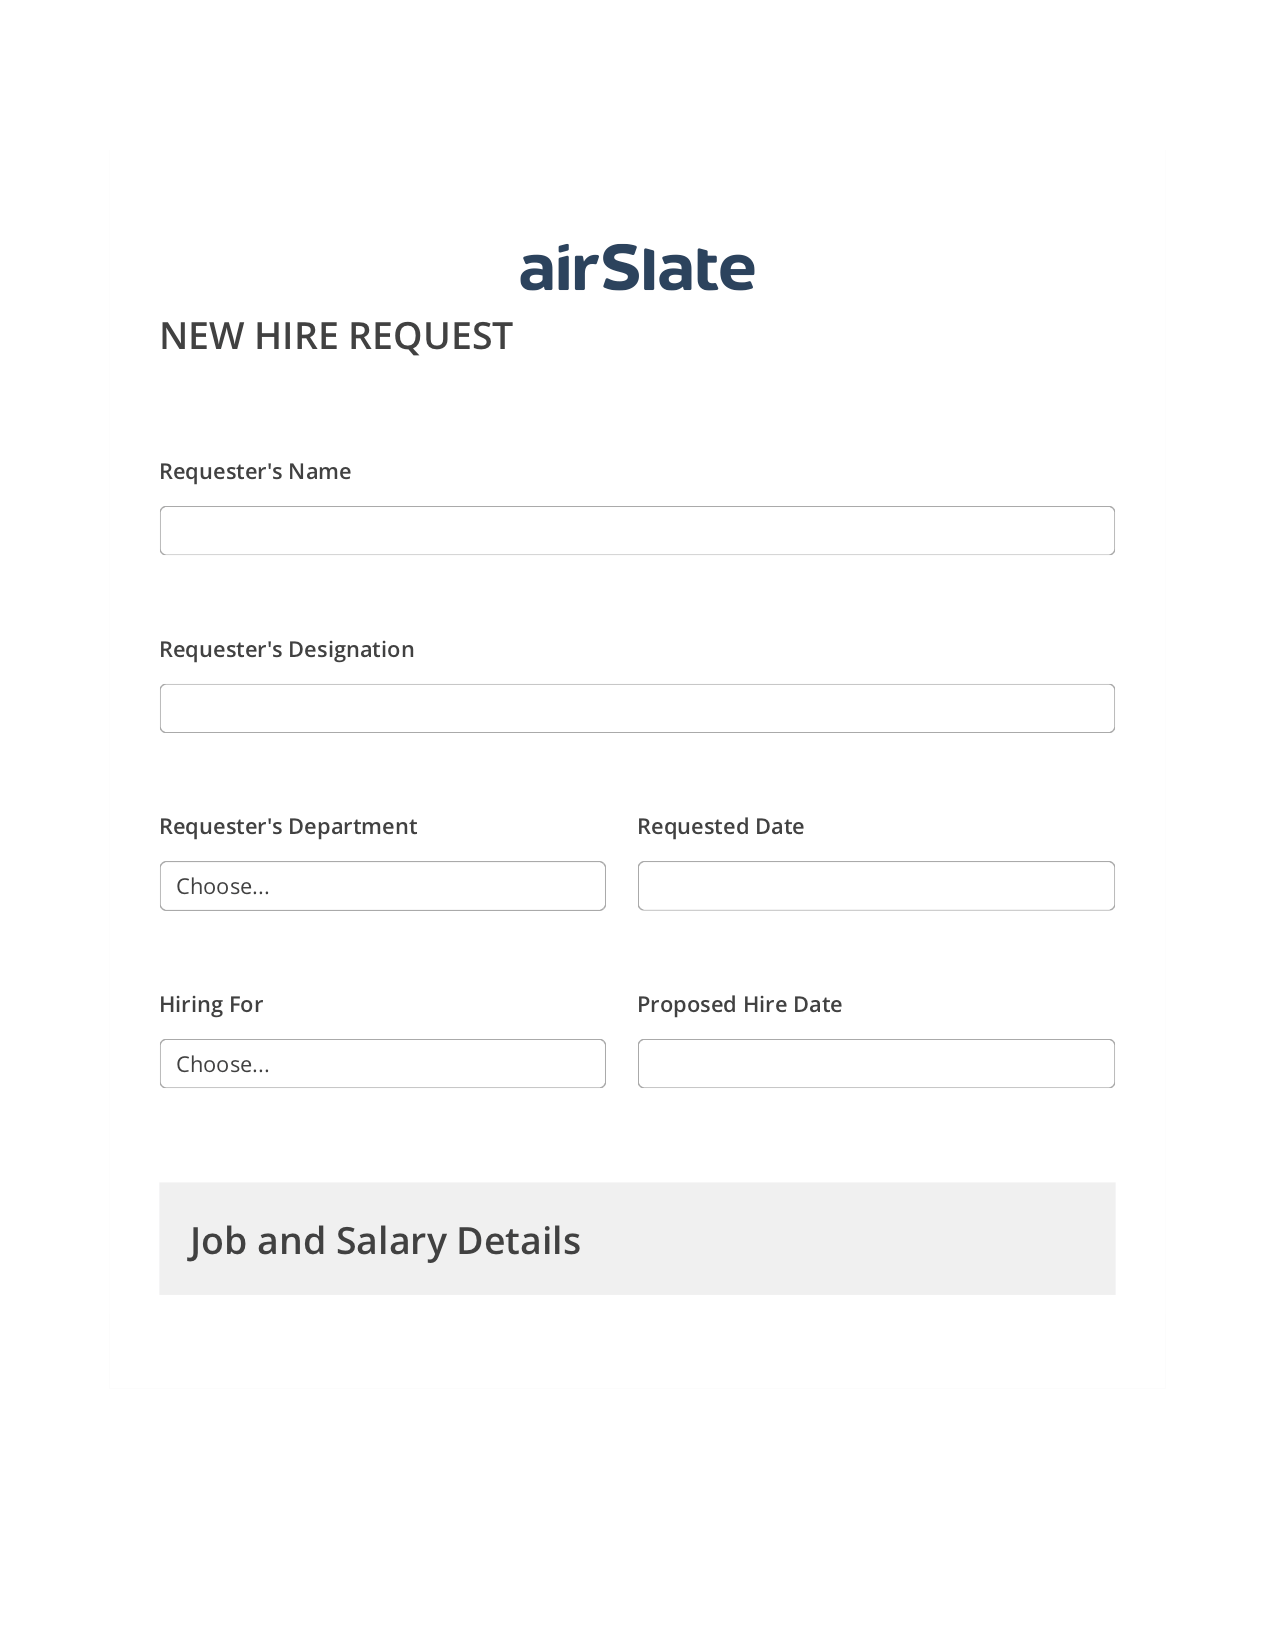 Hiring Request Workflow Pre-fill from Google Sheets Bot, Set signature type addon, Archive to Box Bot